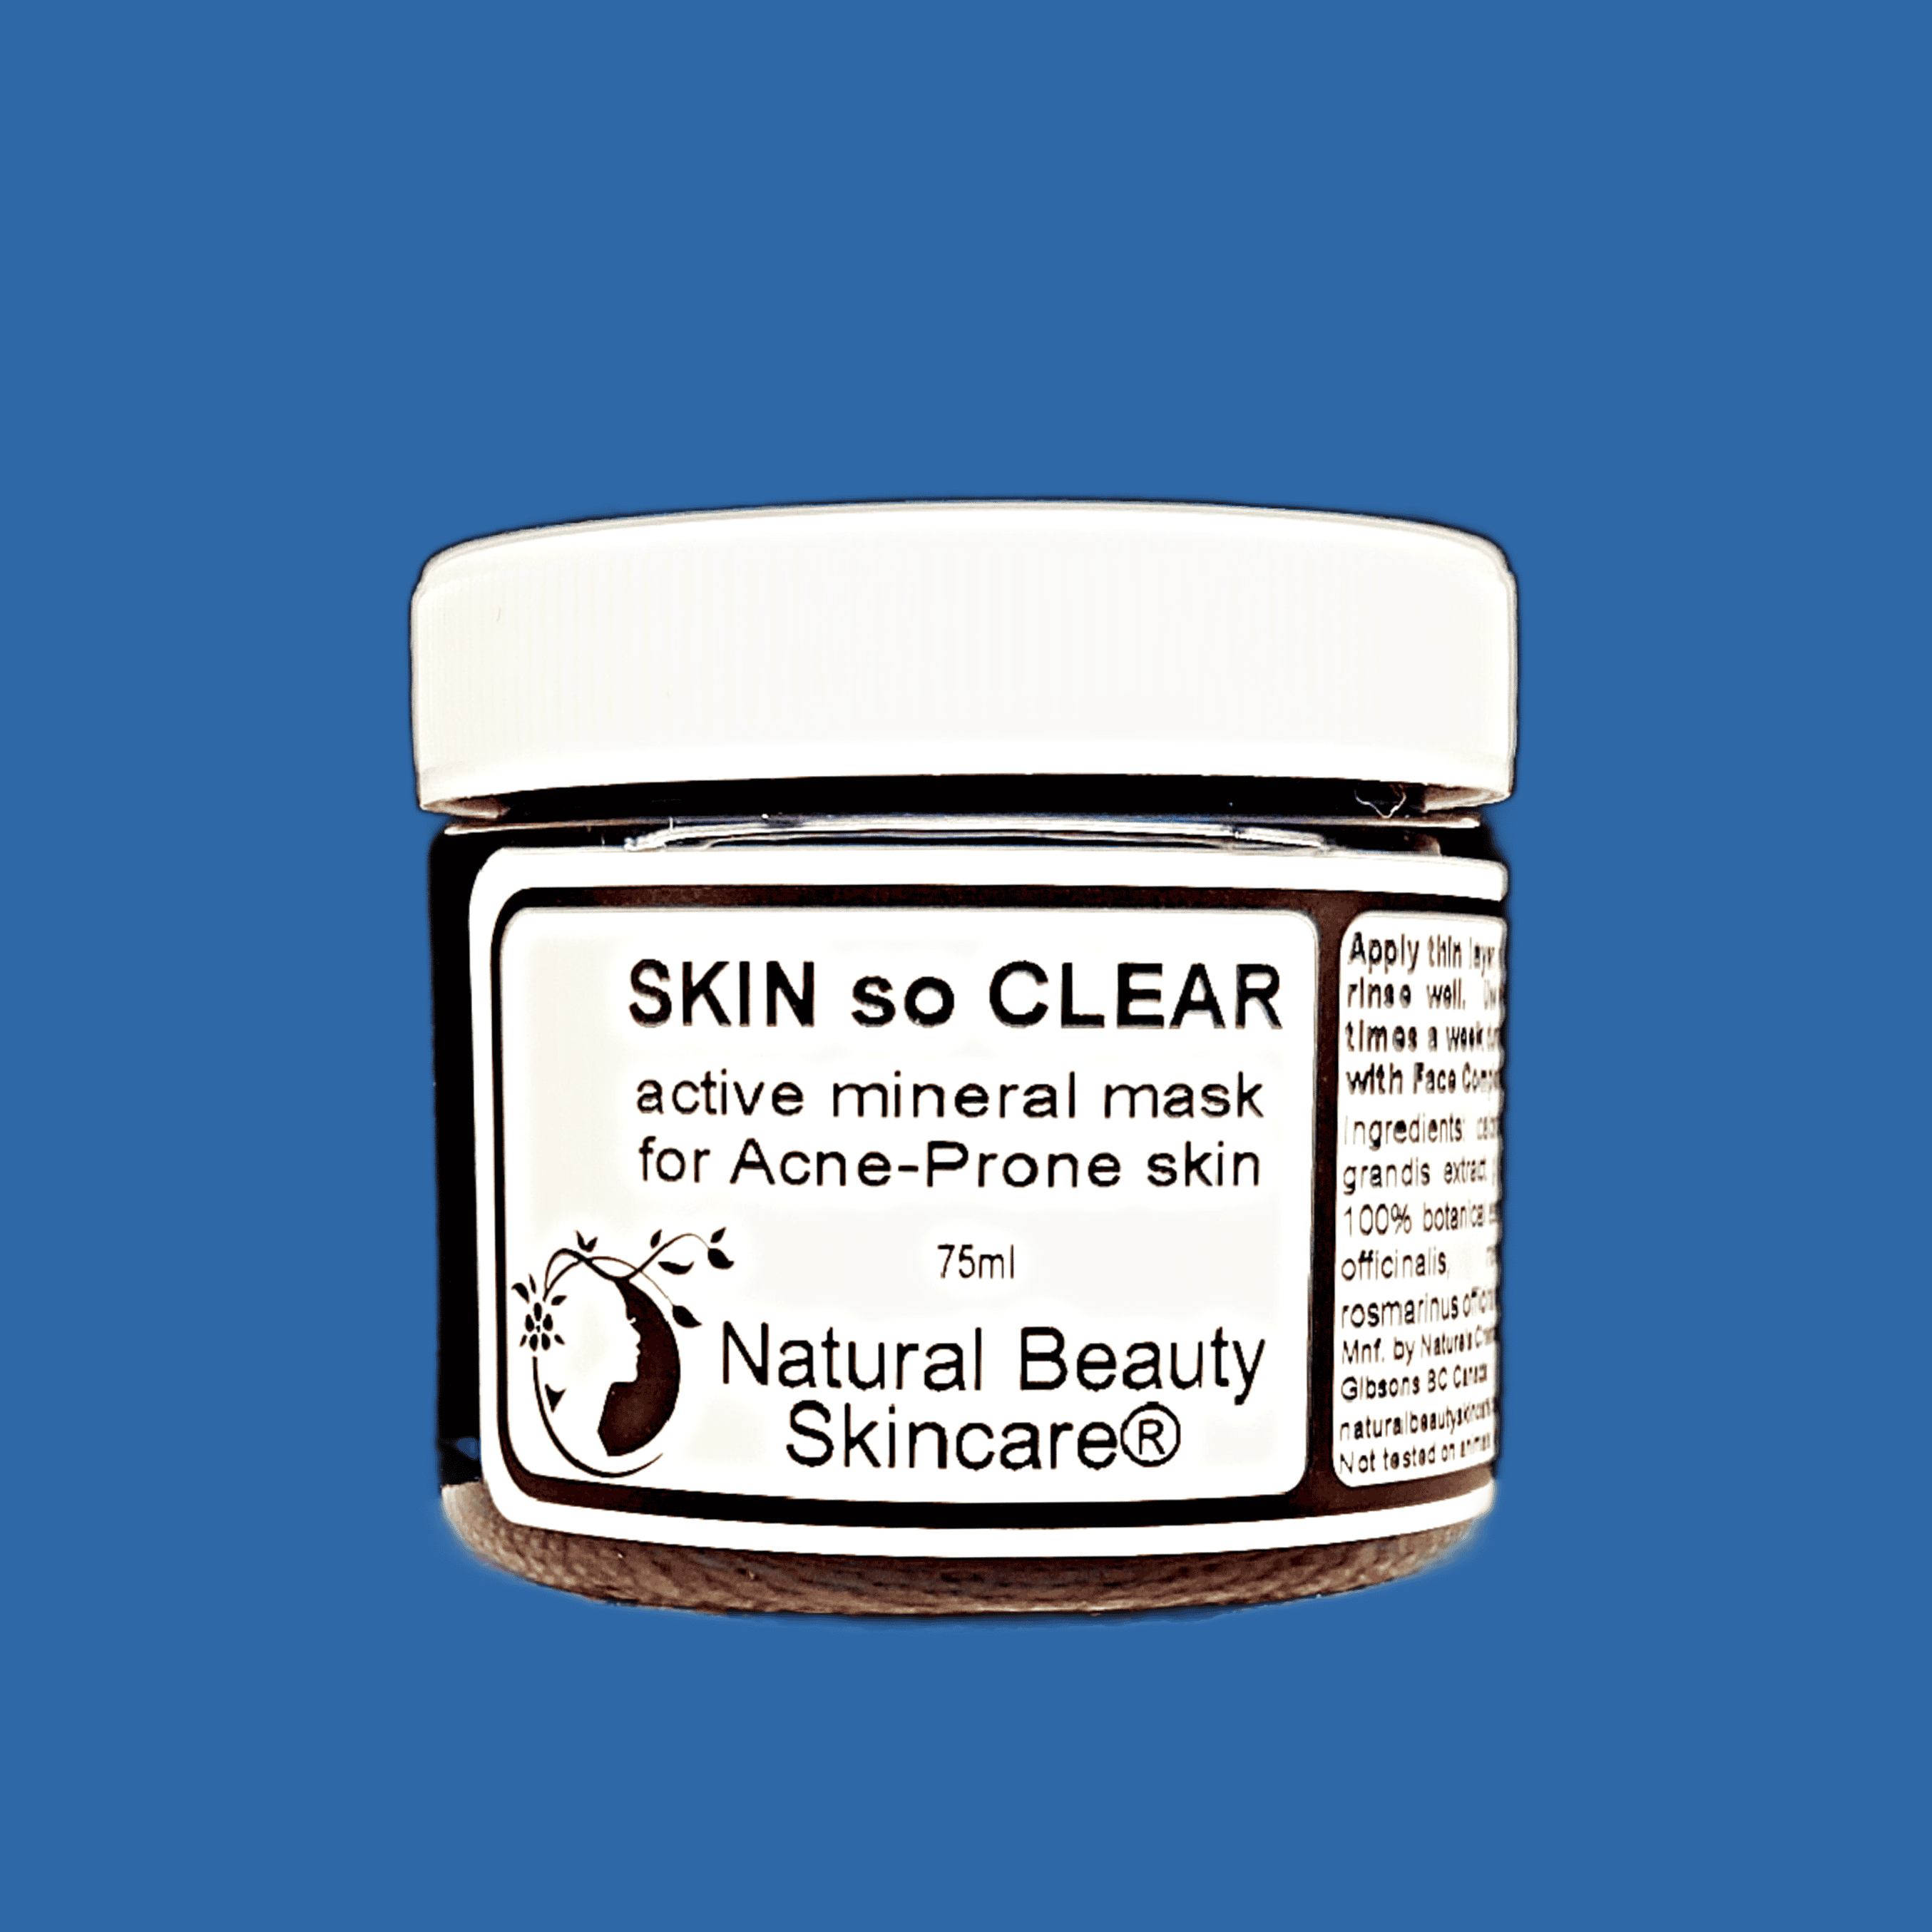 Skin-so-CLEAR™ Mineral Mask